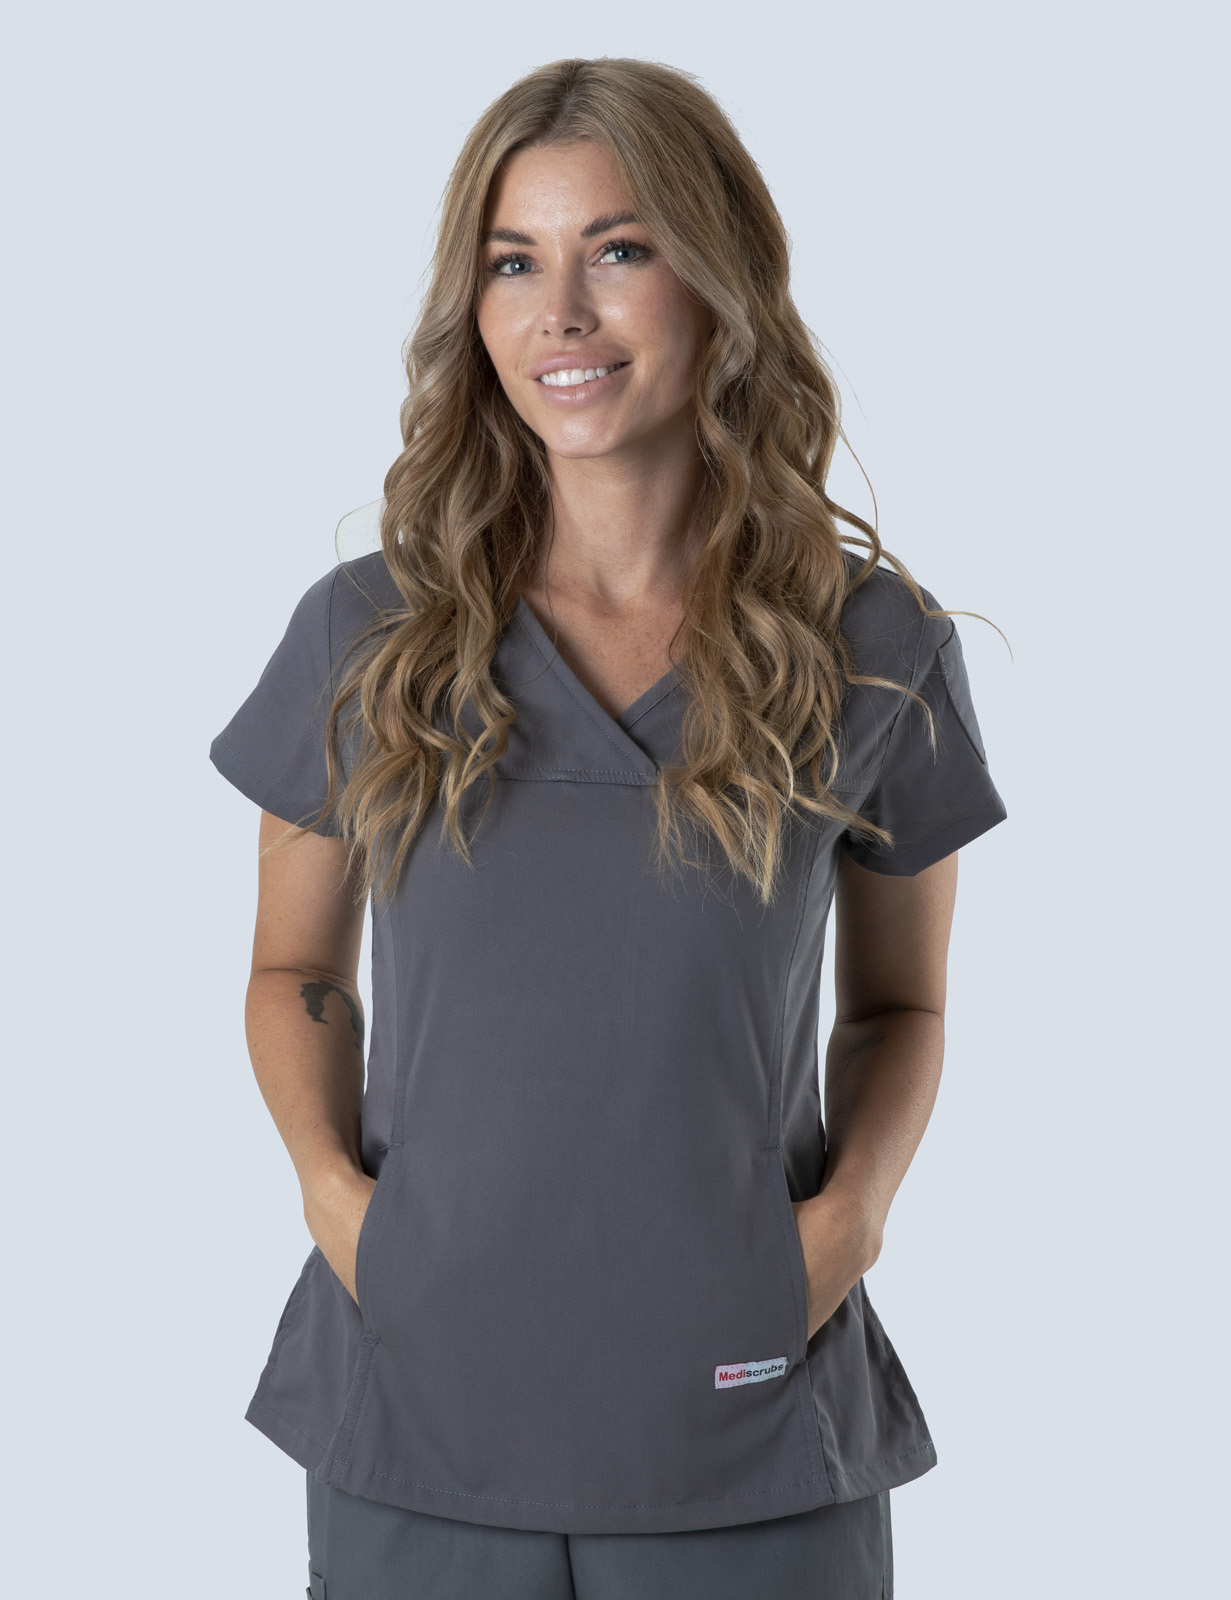 PAH - RMO Junior Doctor (Women's Fit Solid Scrub Top and Cargo Pants in Steel Grey)